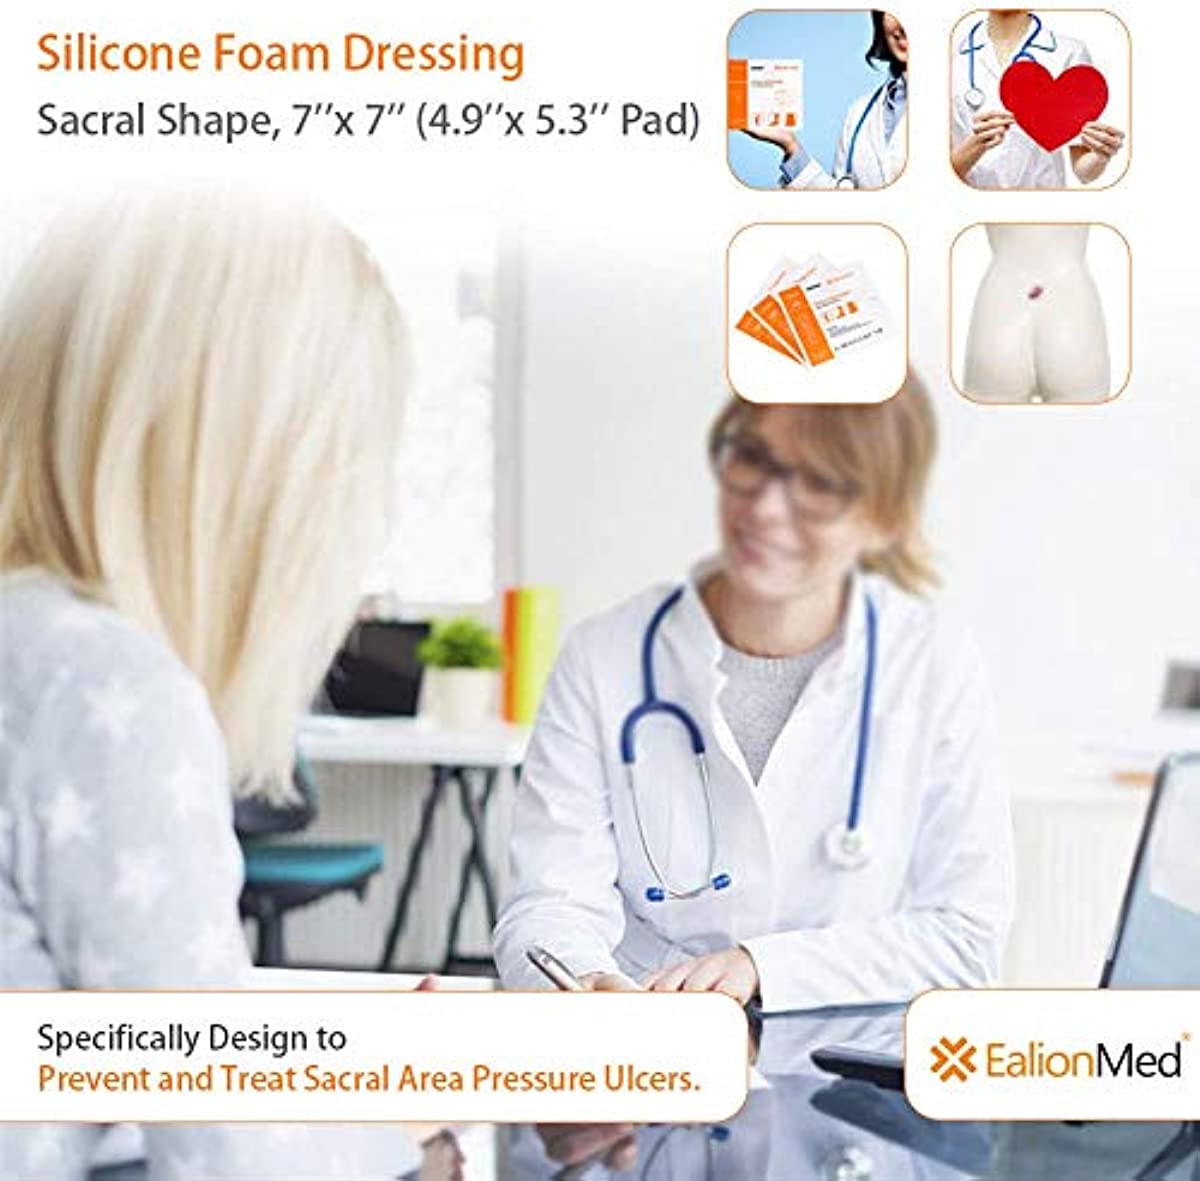 Sacral Silicone Foam Dressing with Border for Sacrum Ulcer, Pressure Ulcer, Butt Bed Sore, Size 7\'\'x7\'\'(4.9\'\'x5.3\'\' Pad), Painless Removal High Absorbency, Bedsore Wound Bandage,5 Pack